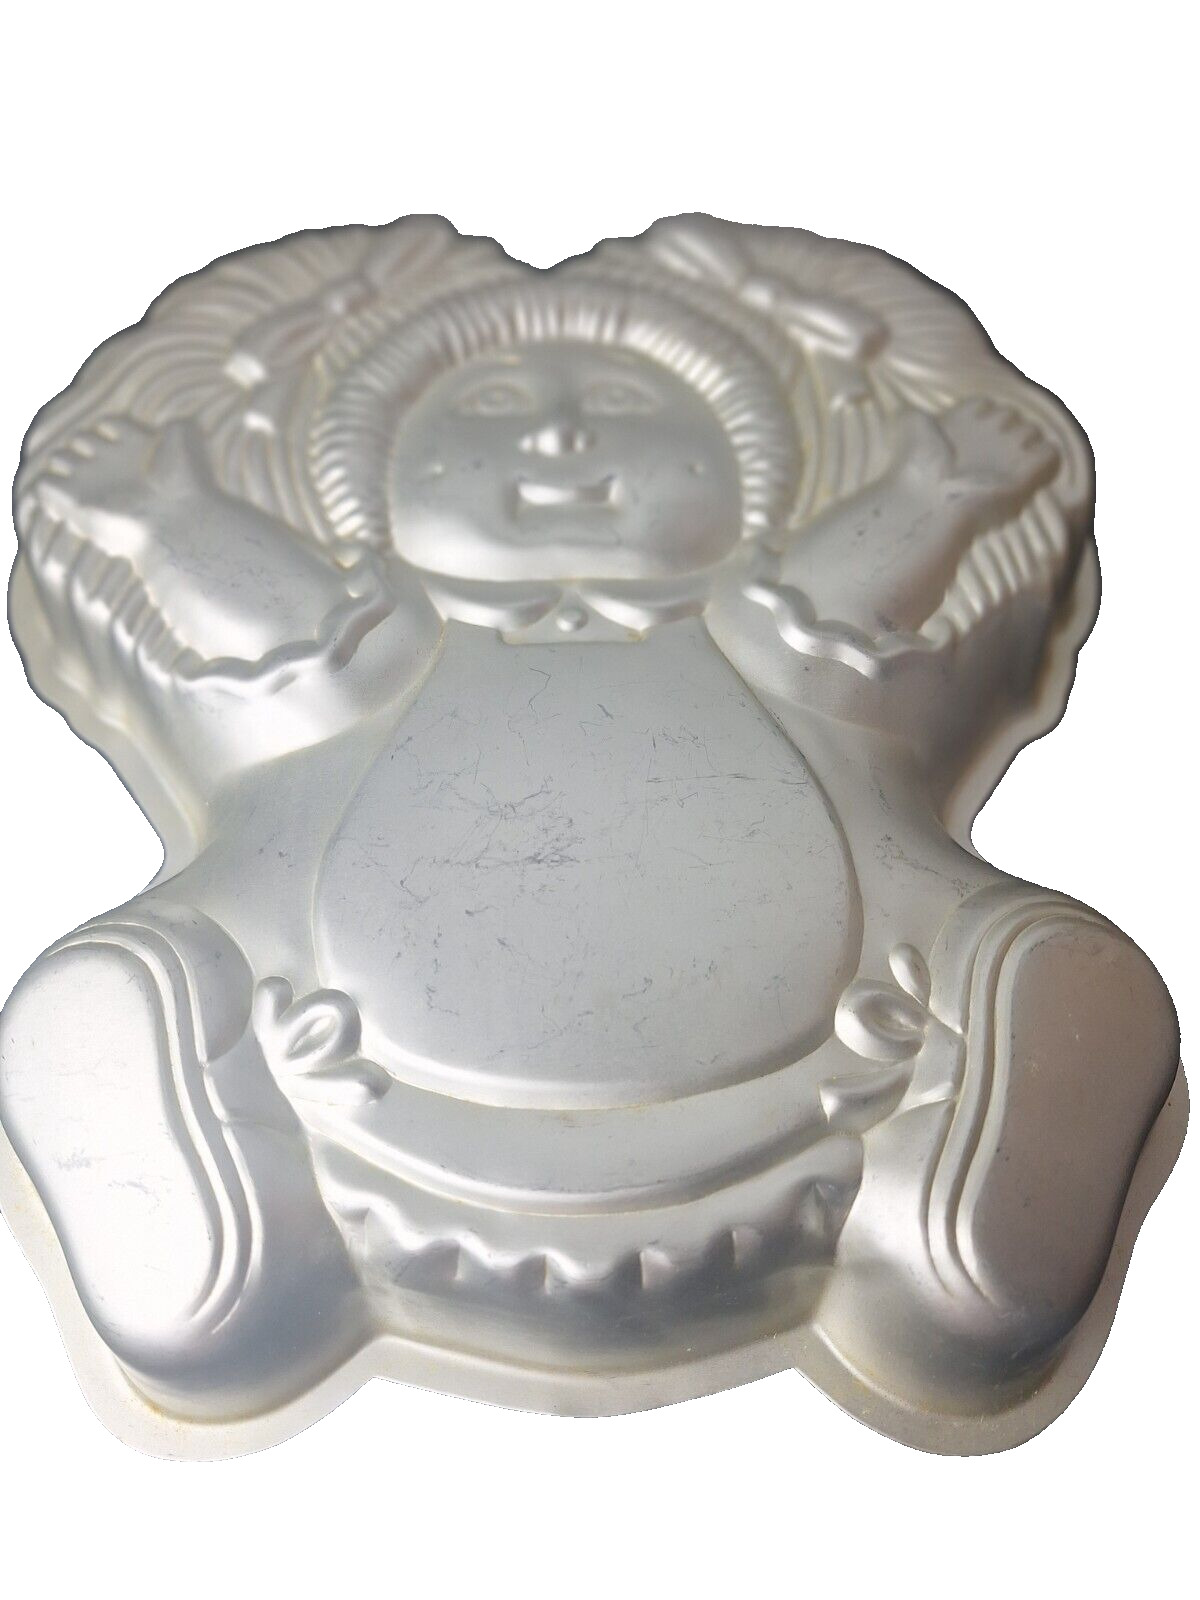 Cabbage Patch Cake Pan